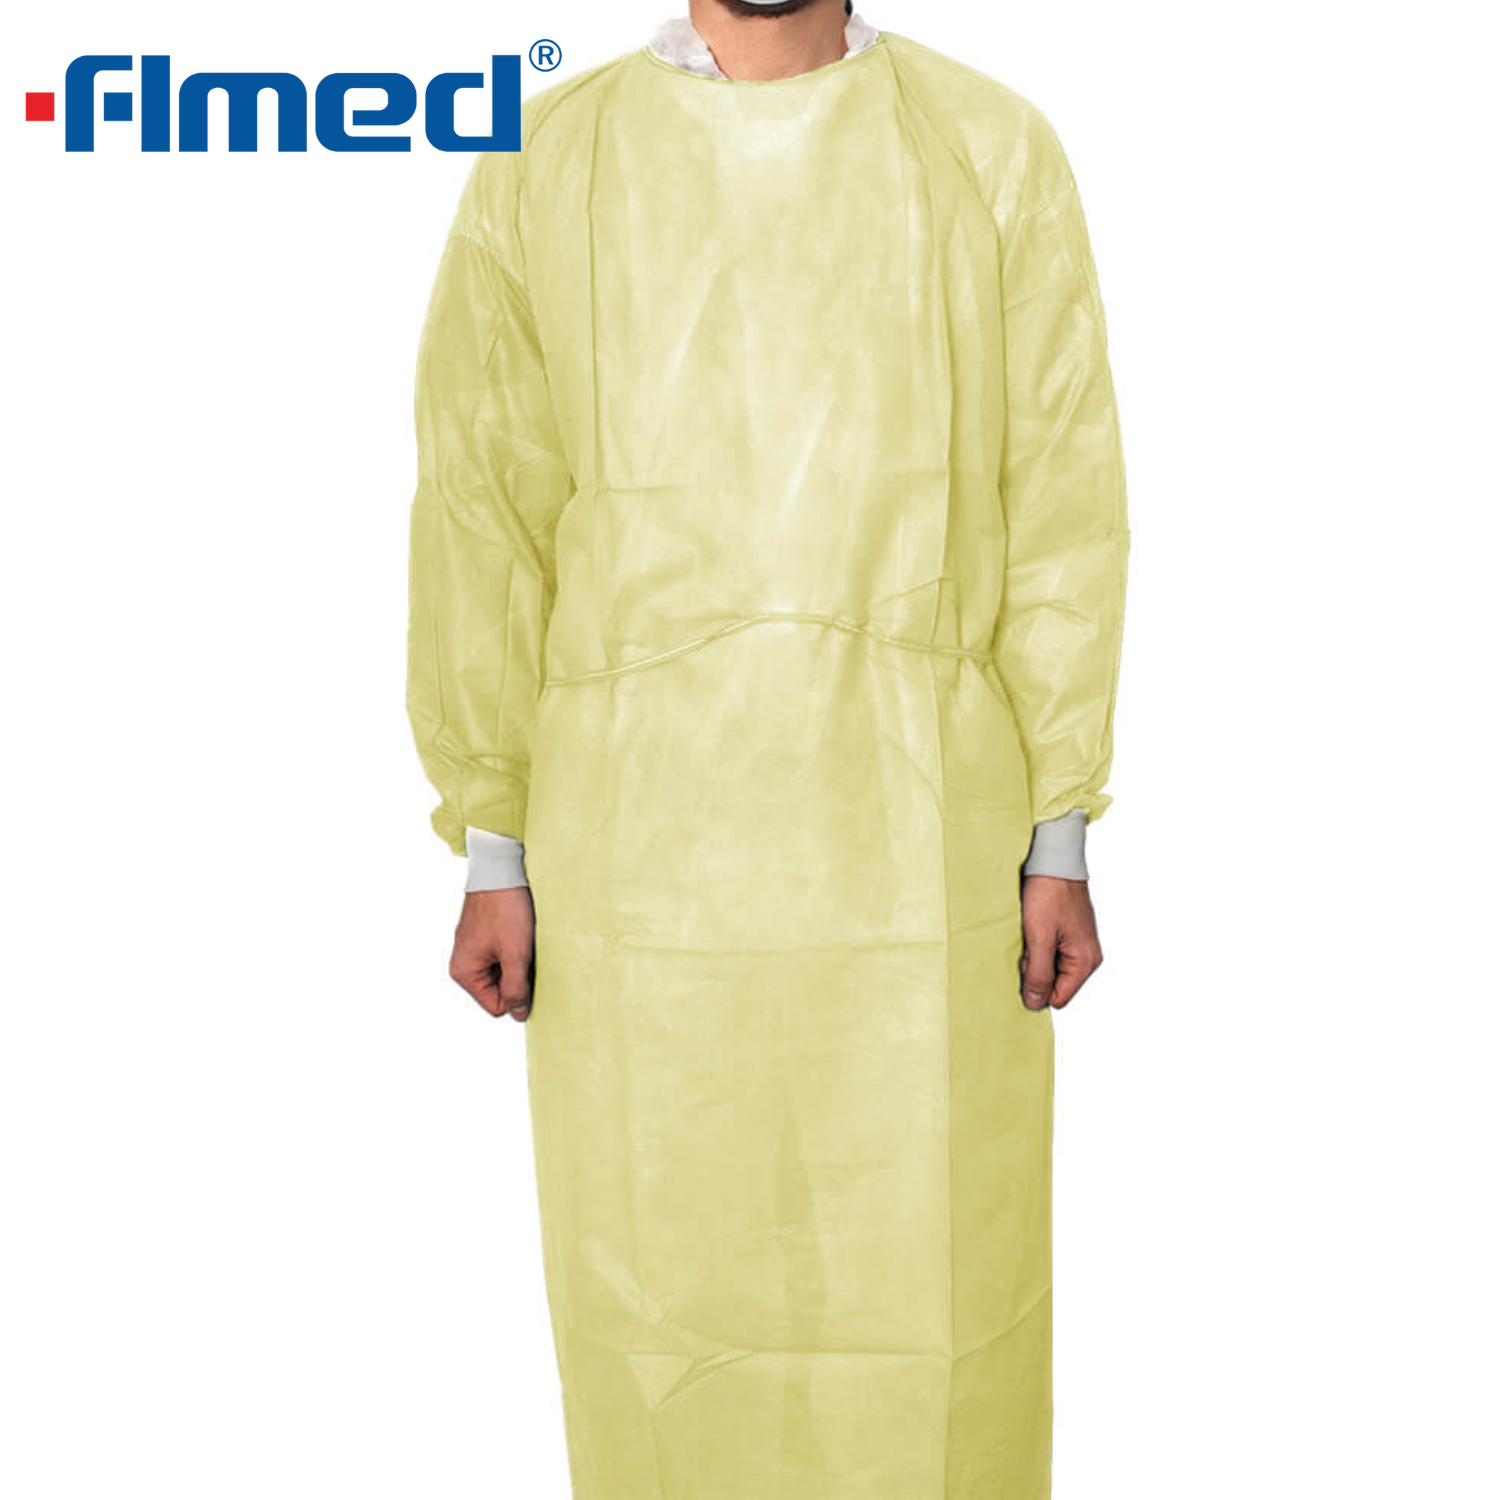 Medical Gown with Elastic Cuffs, PP Non-woven, Non-sterile